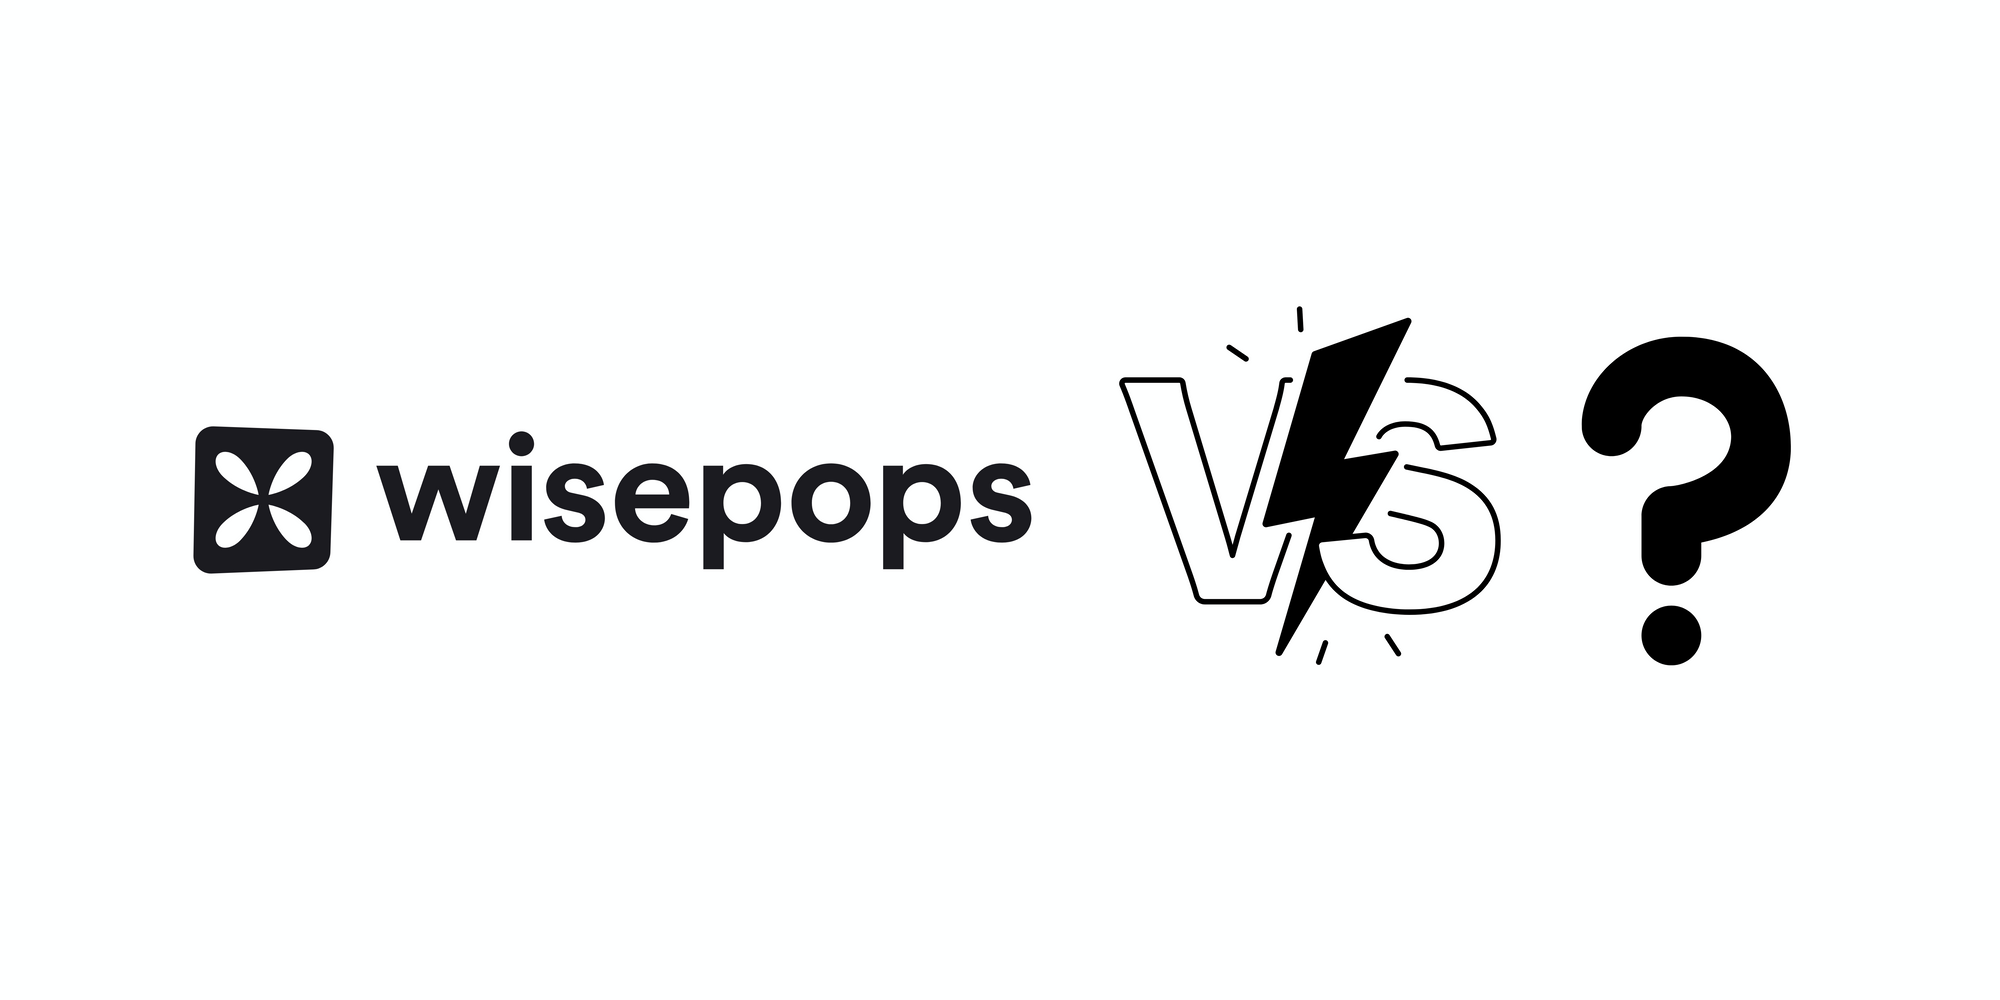 Wisepops icon, versus symbol and a question mark to mention the alternatives on white background